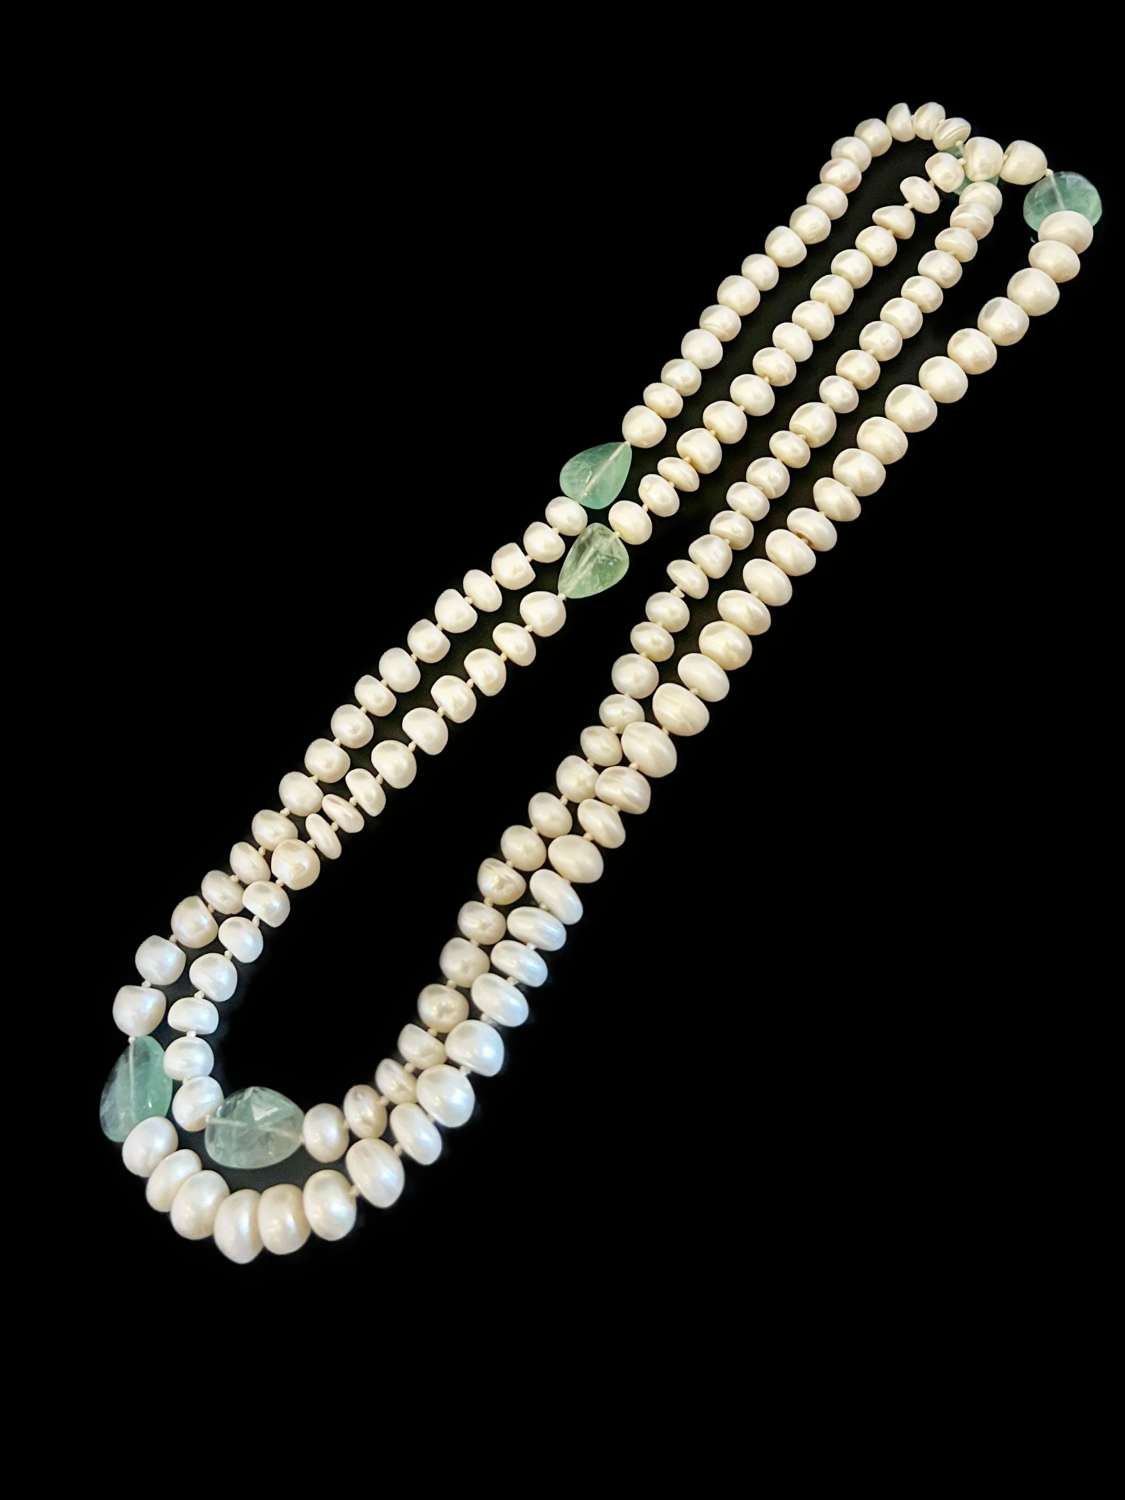 A Long peal necklace